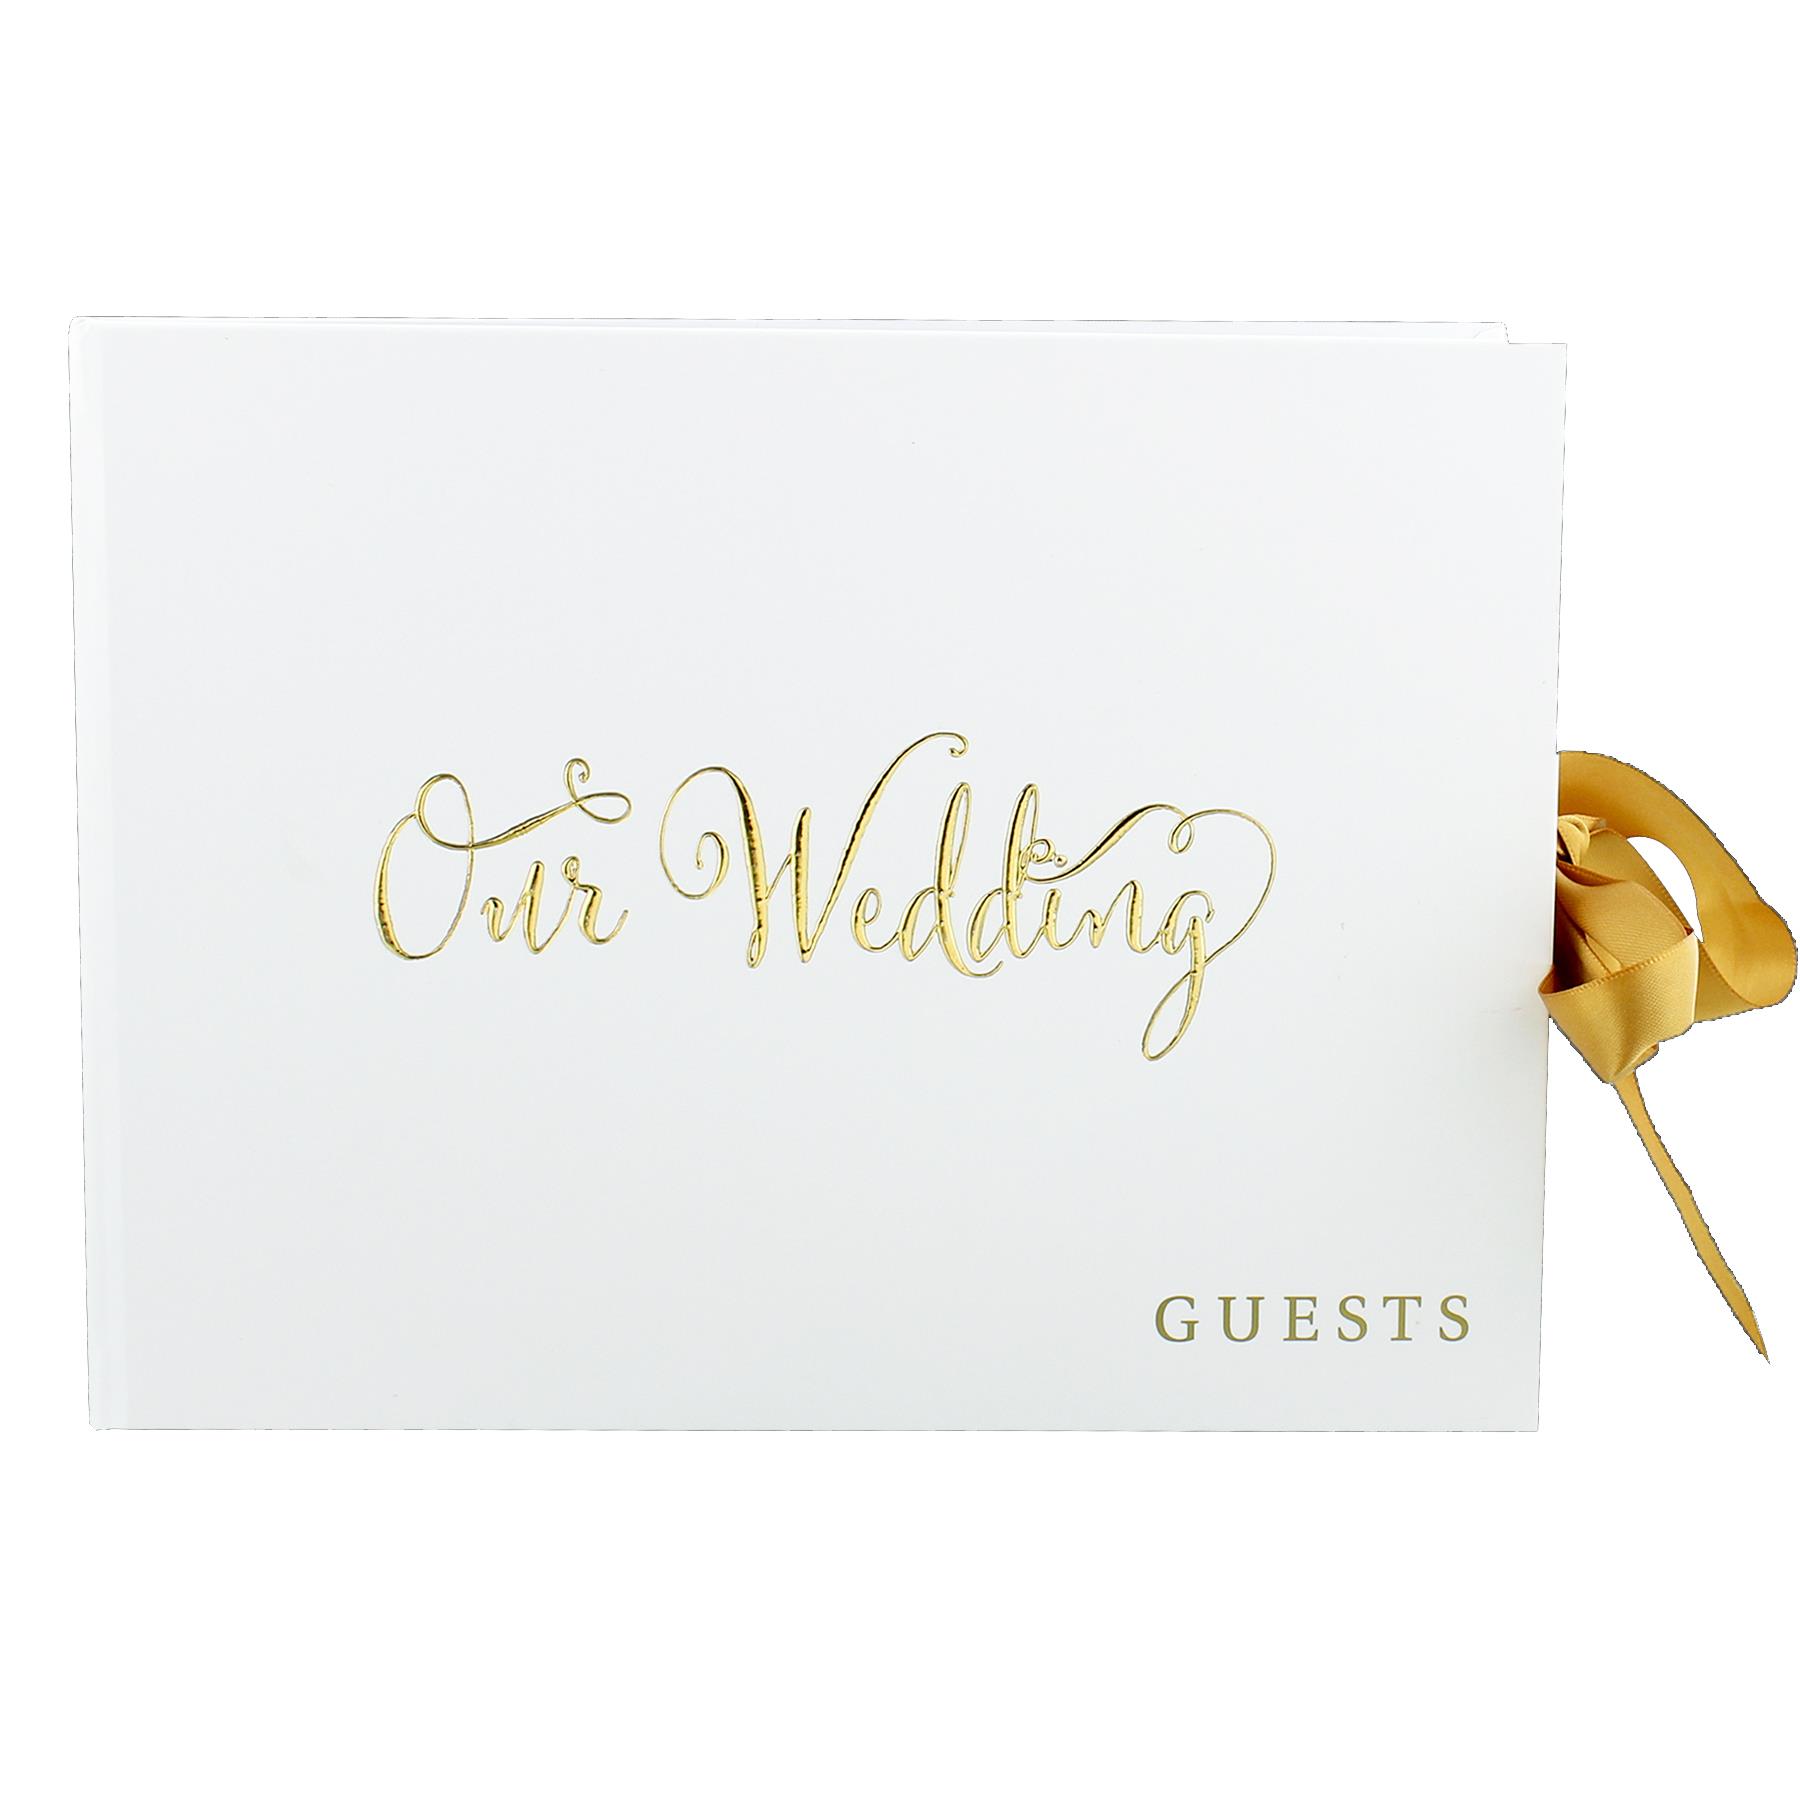 Always and Forever Range Gold Foil 'Our Wedding' - Guest Book